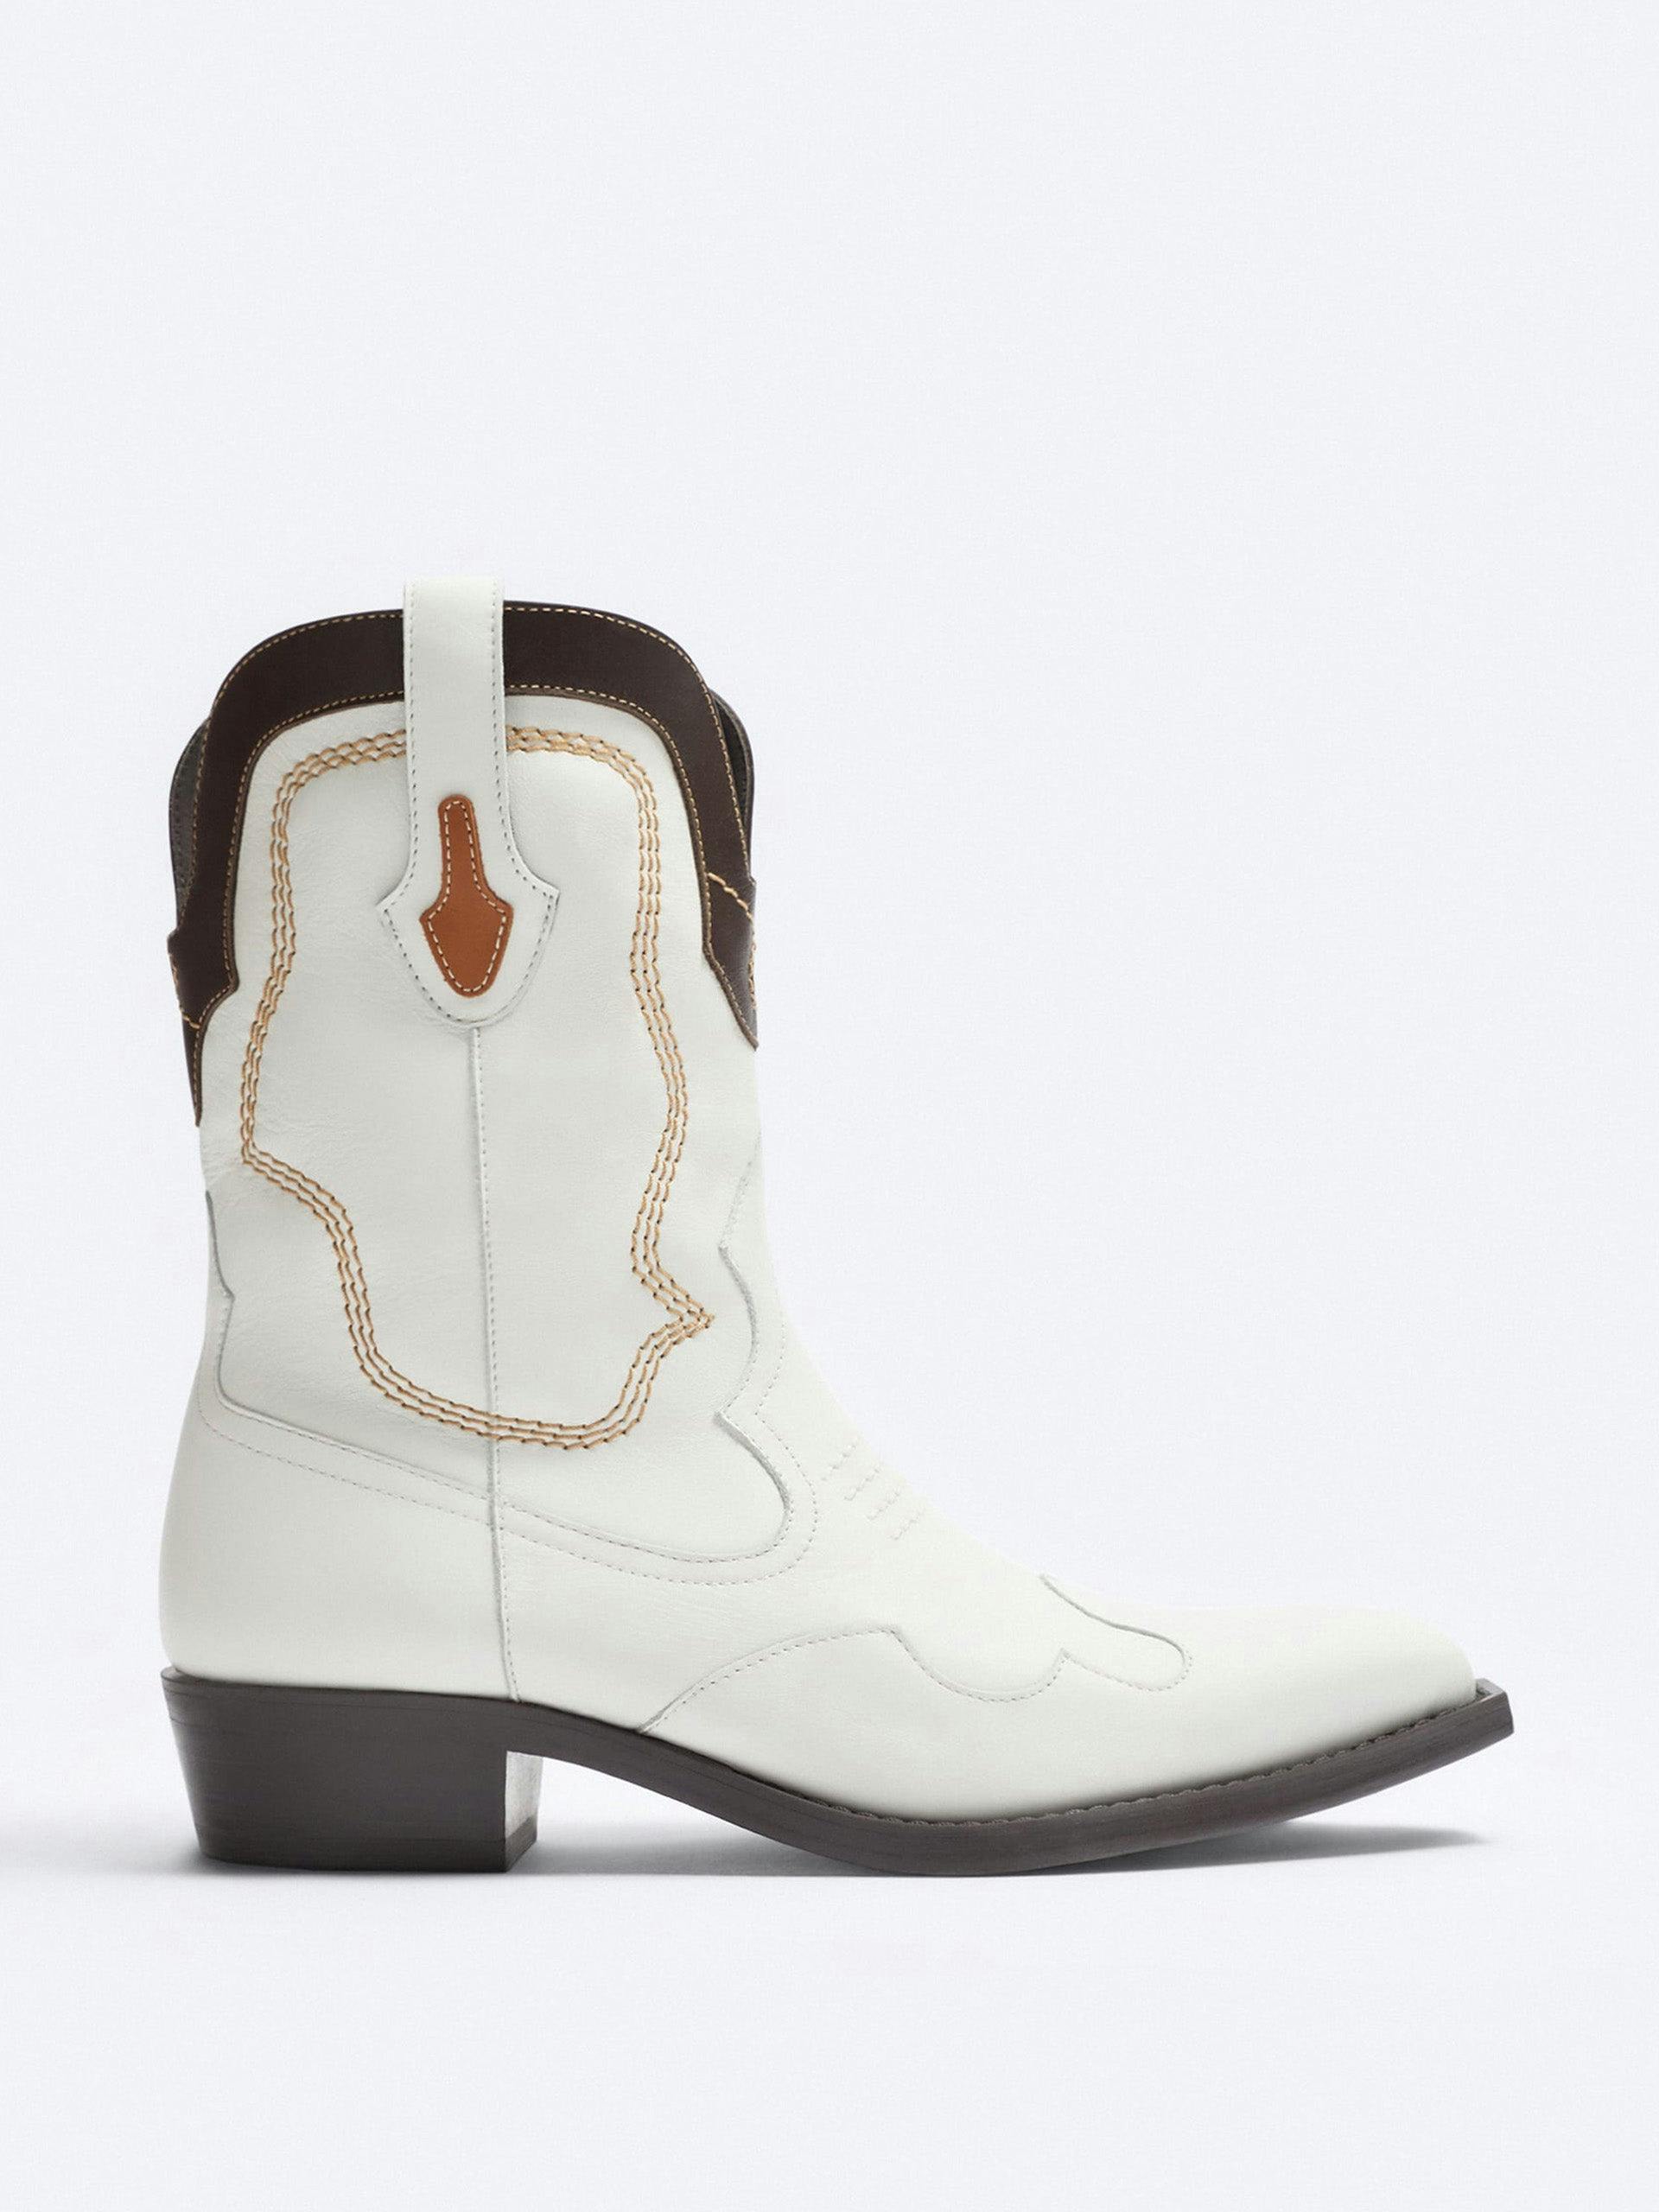 White leather cowboy boots